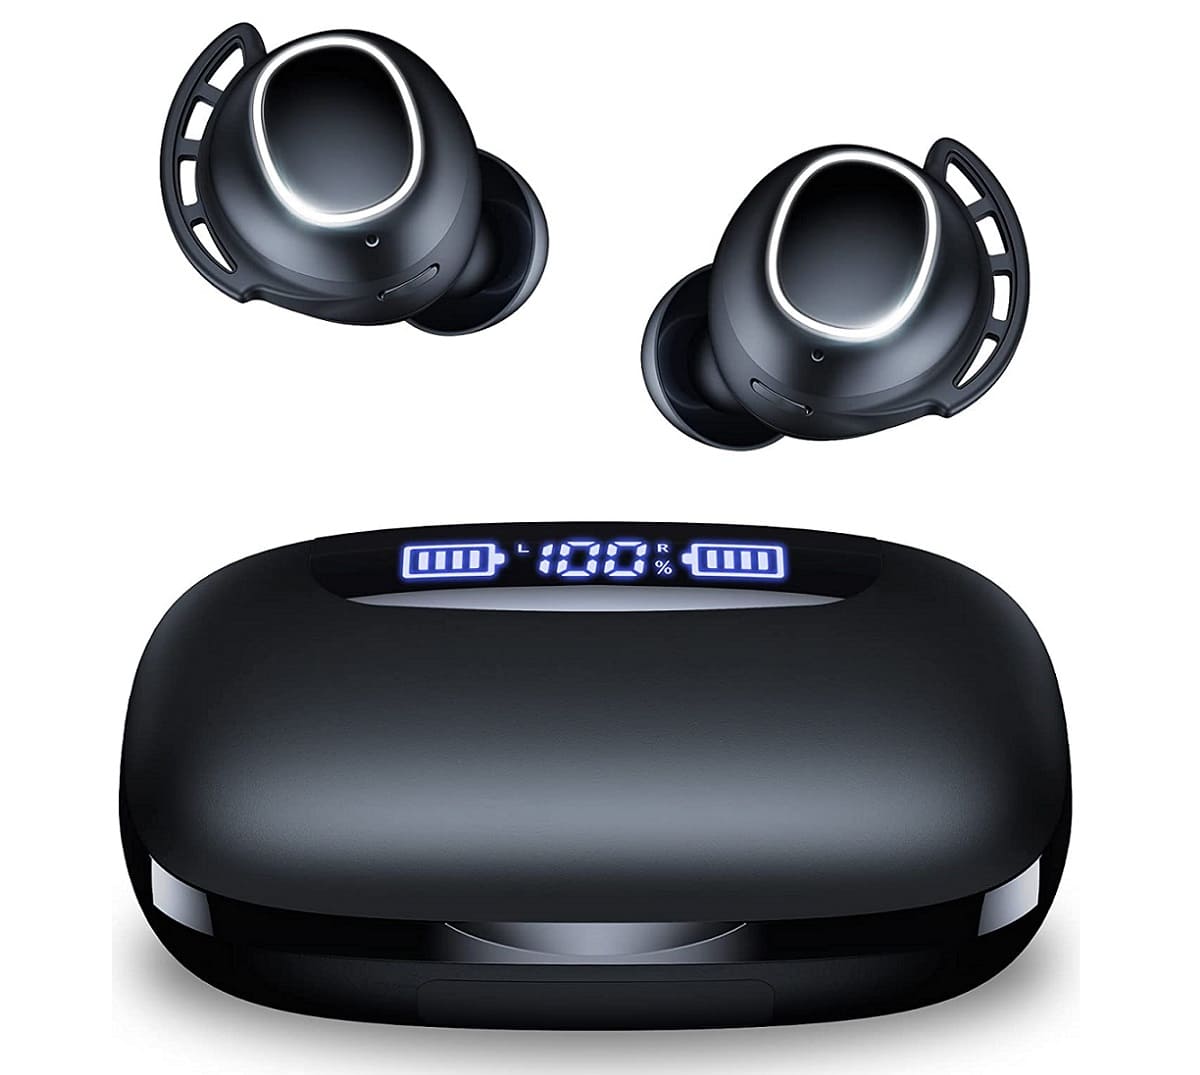 Tagry X18 Wireless Earbuds Overview and Reviews